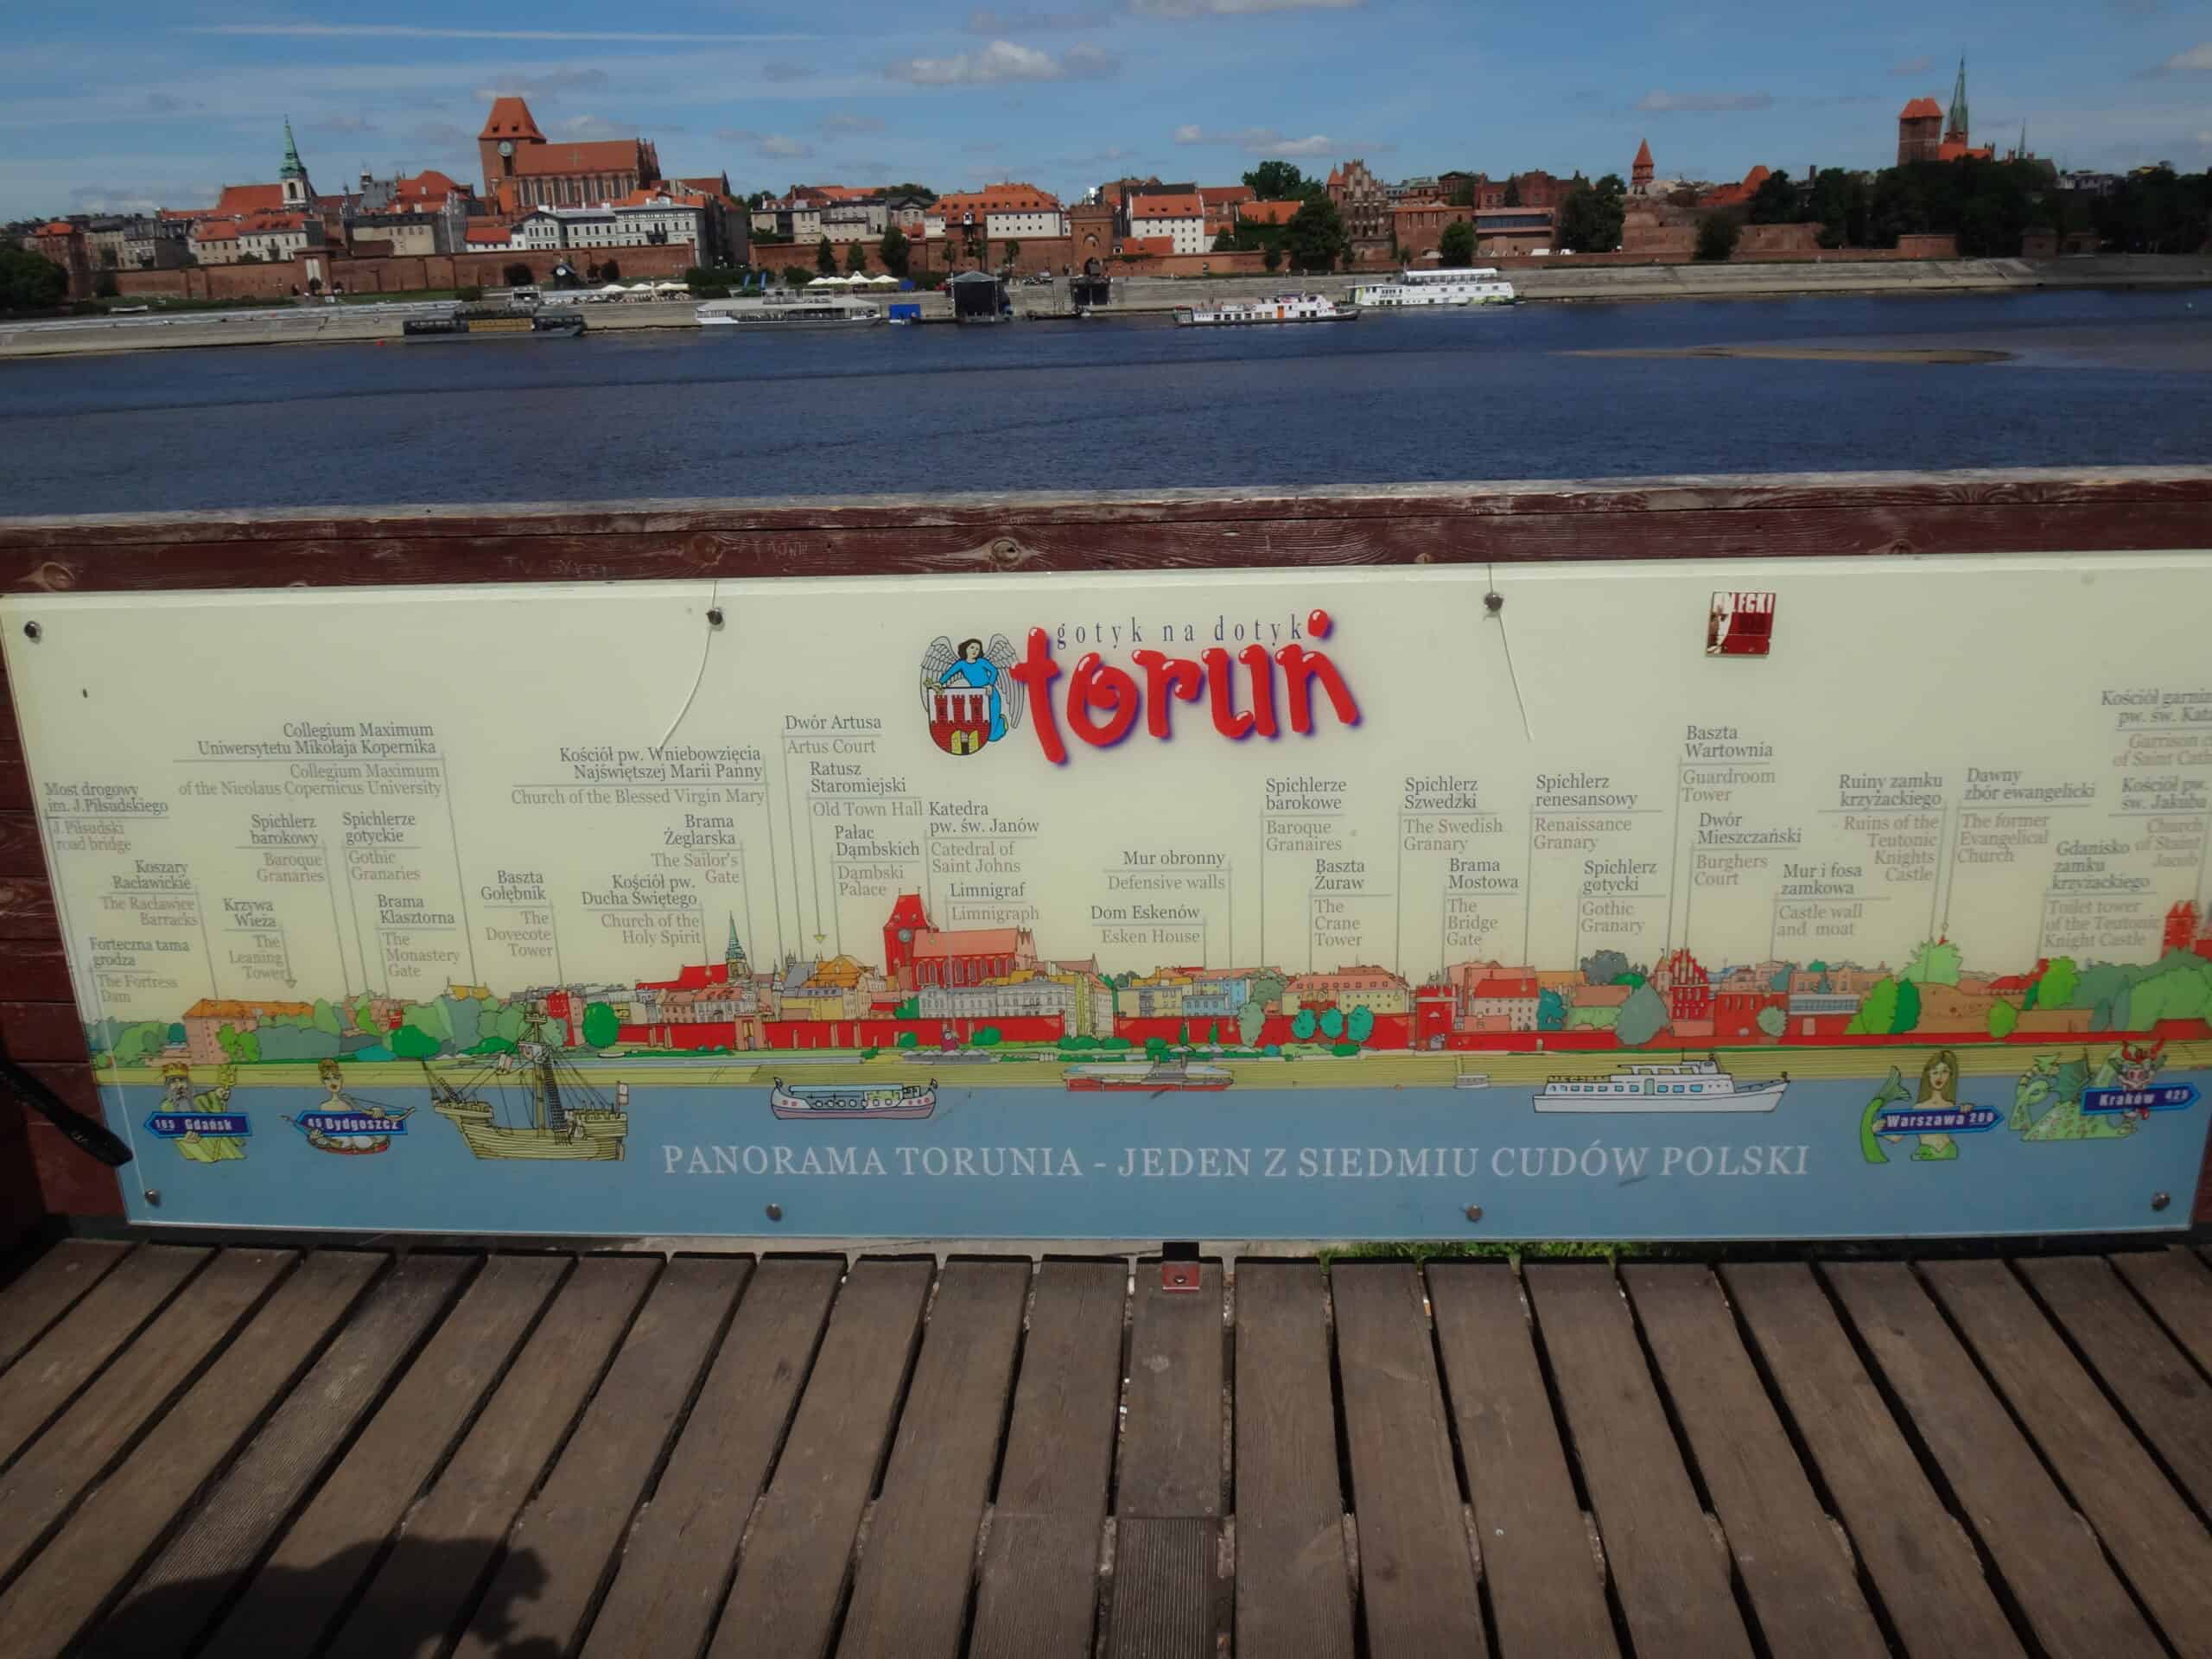 The Places Where We Go podcast views the panoramic view in Torun Poland